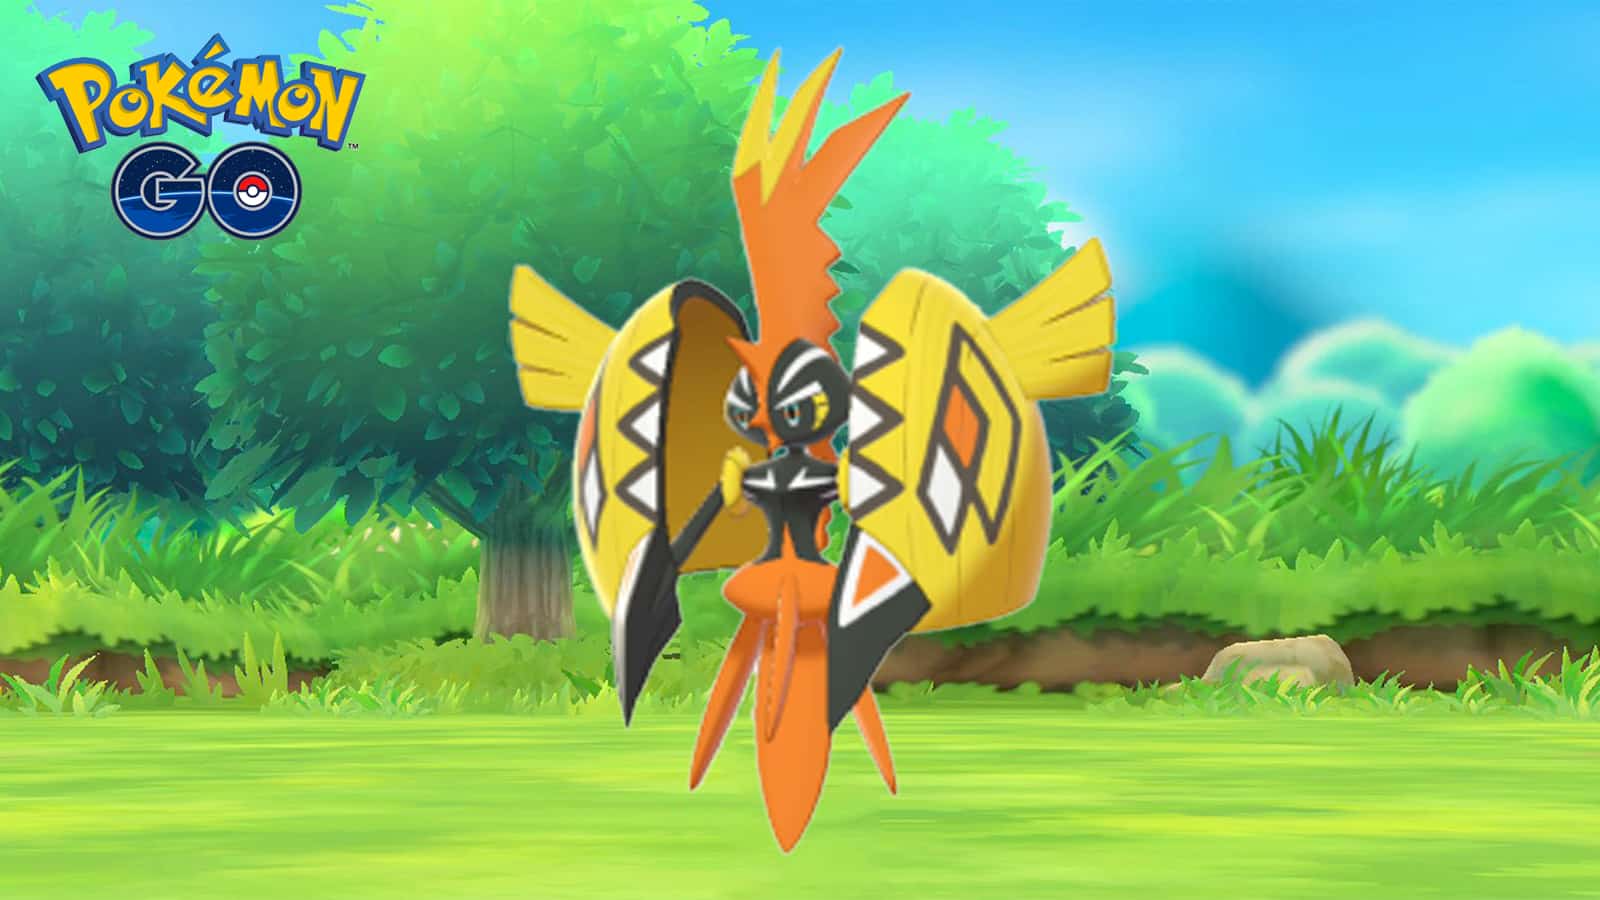 Shiny Tapu Koko is Available Now for Pokemon Sun and Moon Players